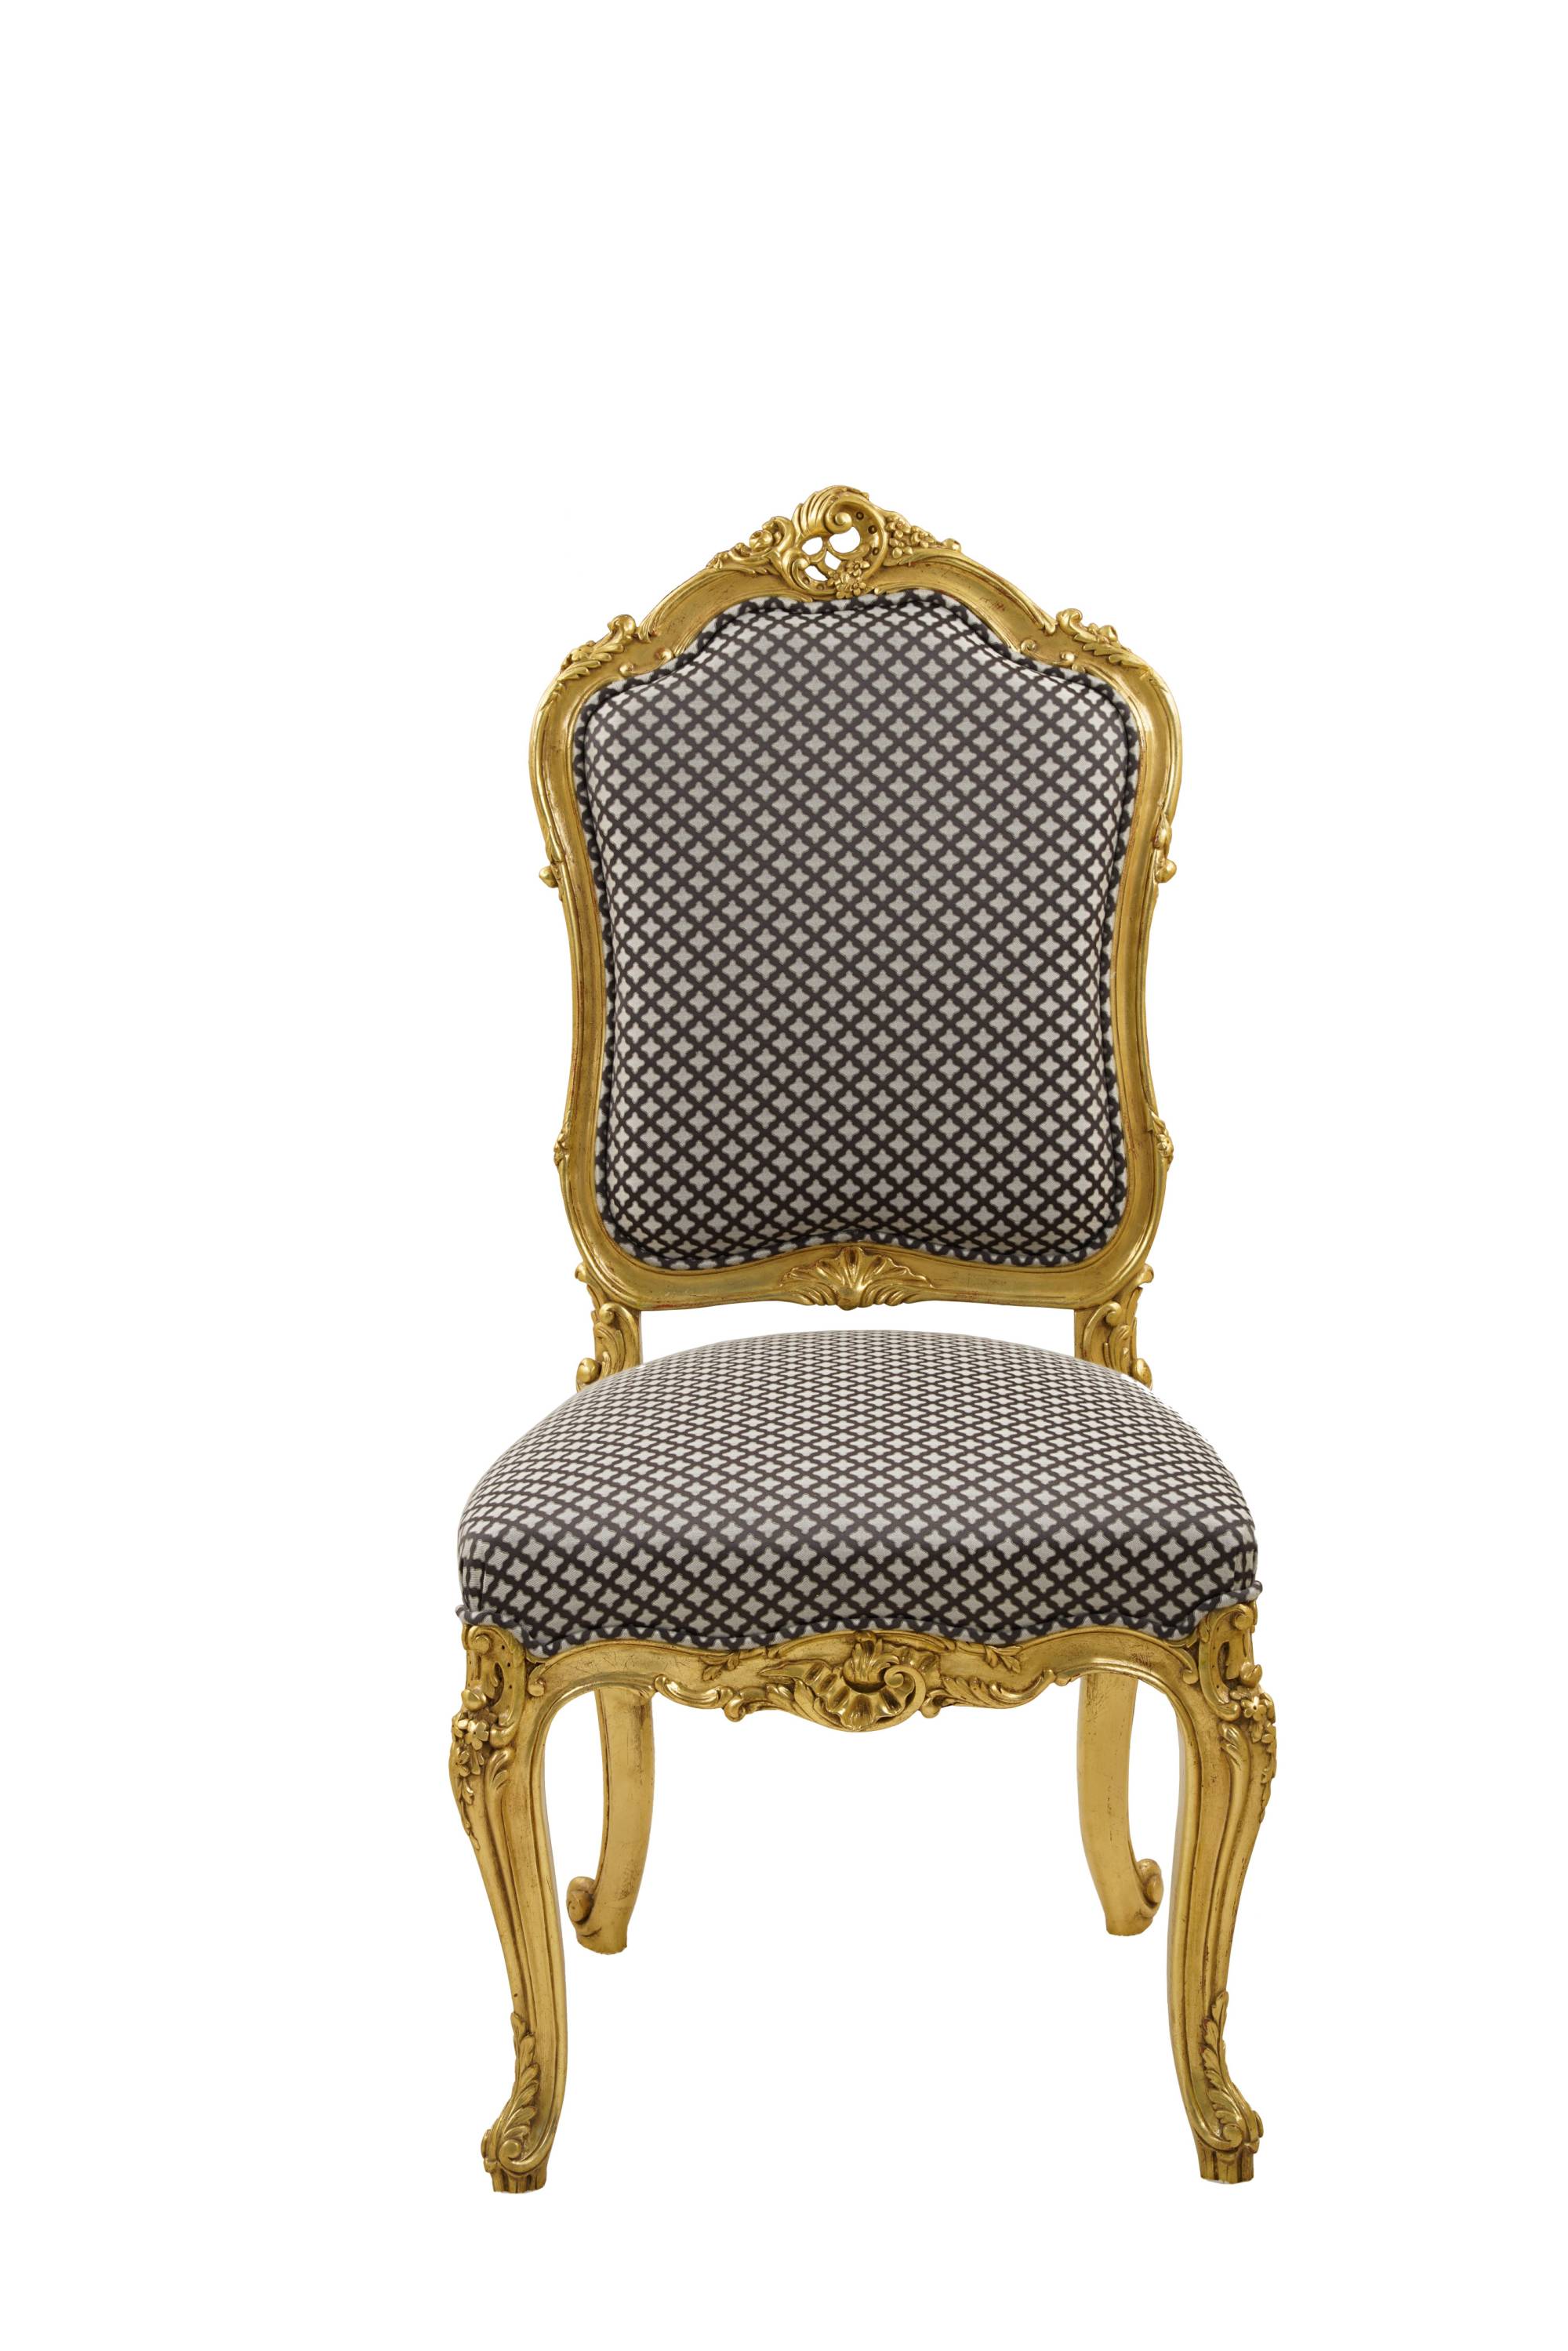 ART. 2177 – The elegance of luxury classic Chairs made in Italy by C.G. Capelletti.